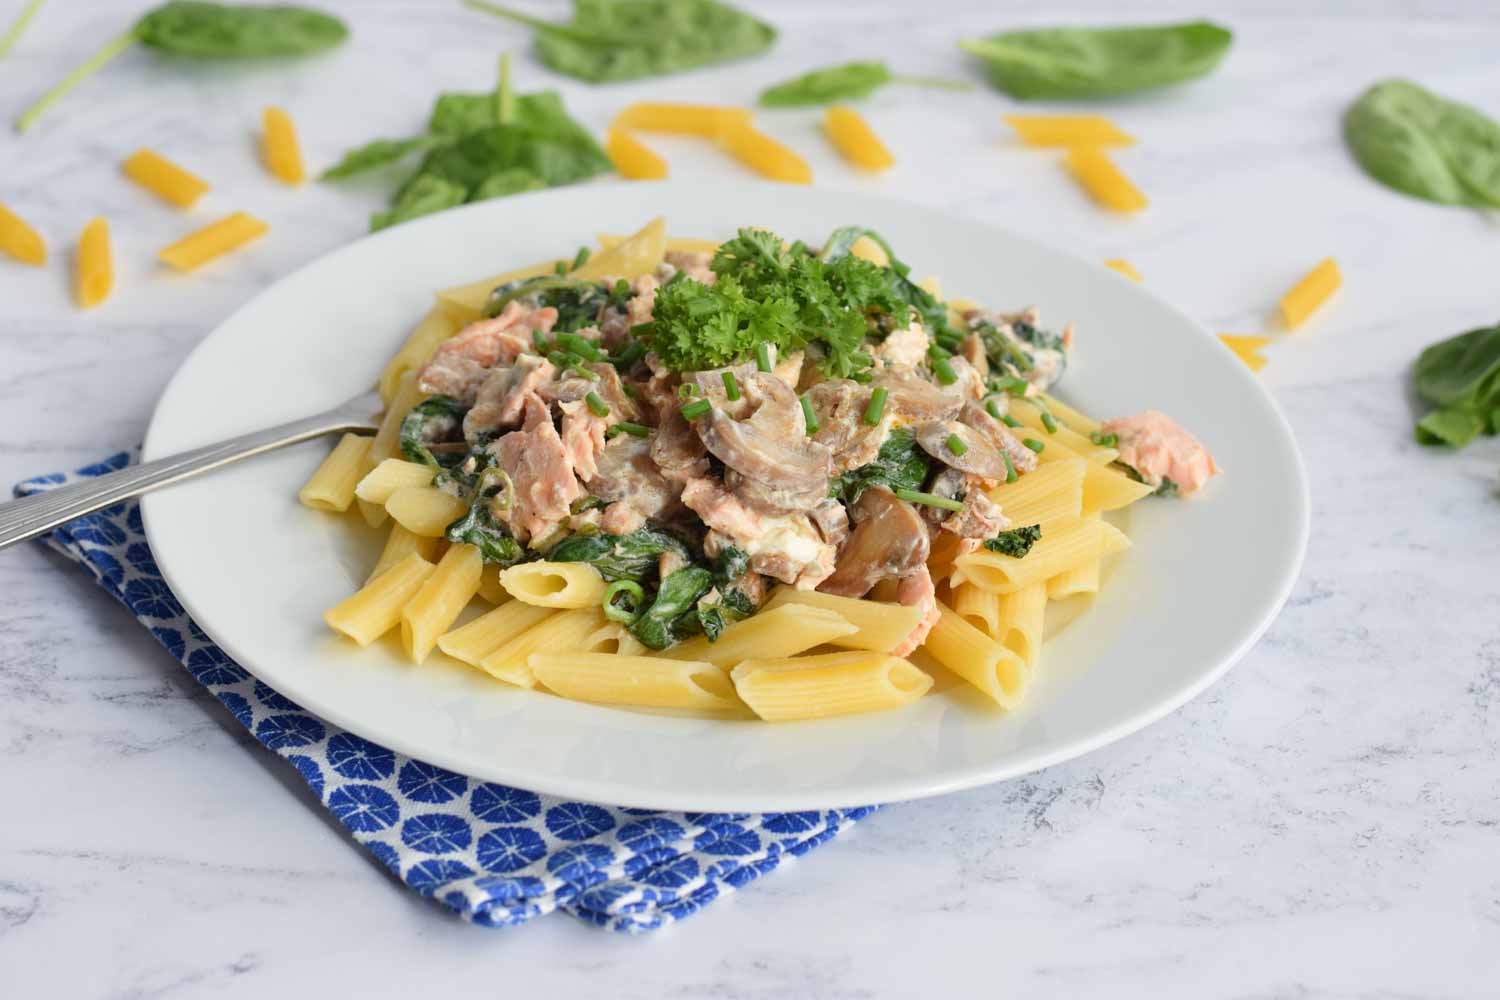 Low FODMAP creamy pasta with salmon and spinach on plate